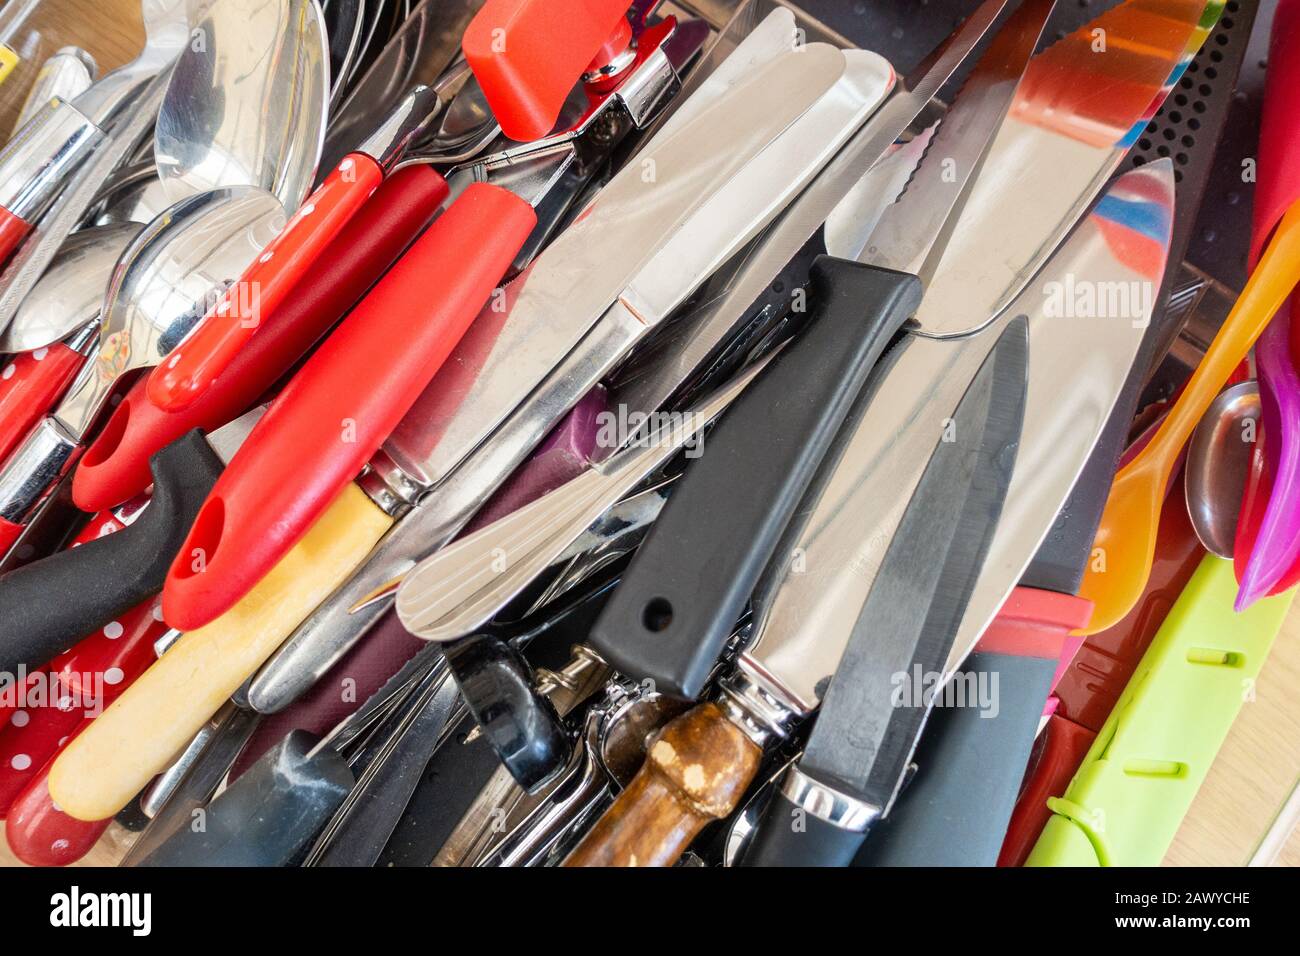 Close up view of kitchen knives and other cutlery Stock Photo